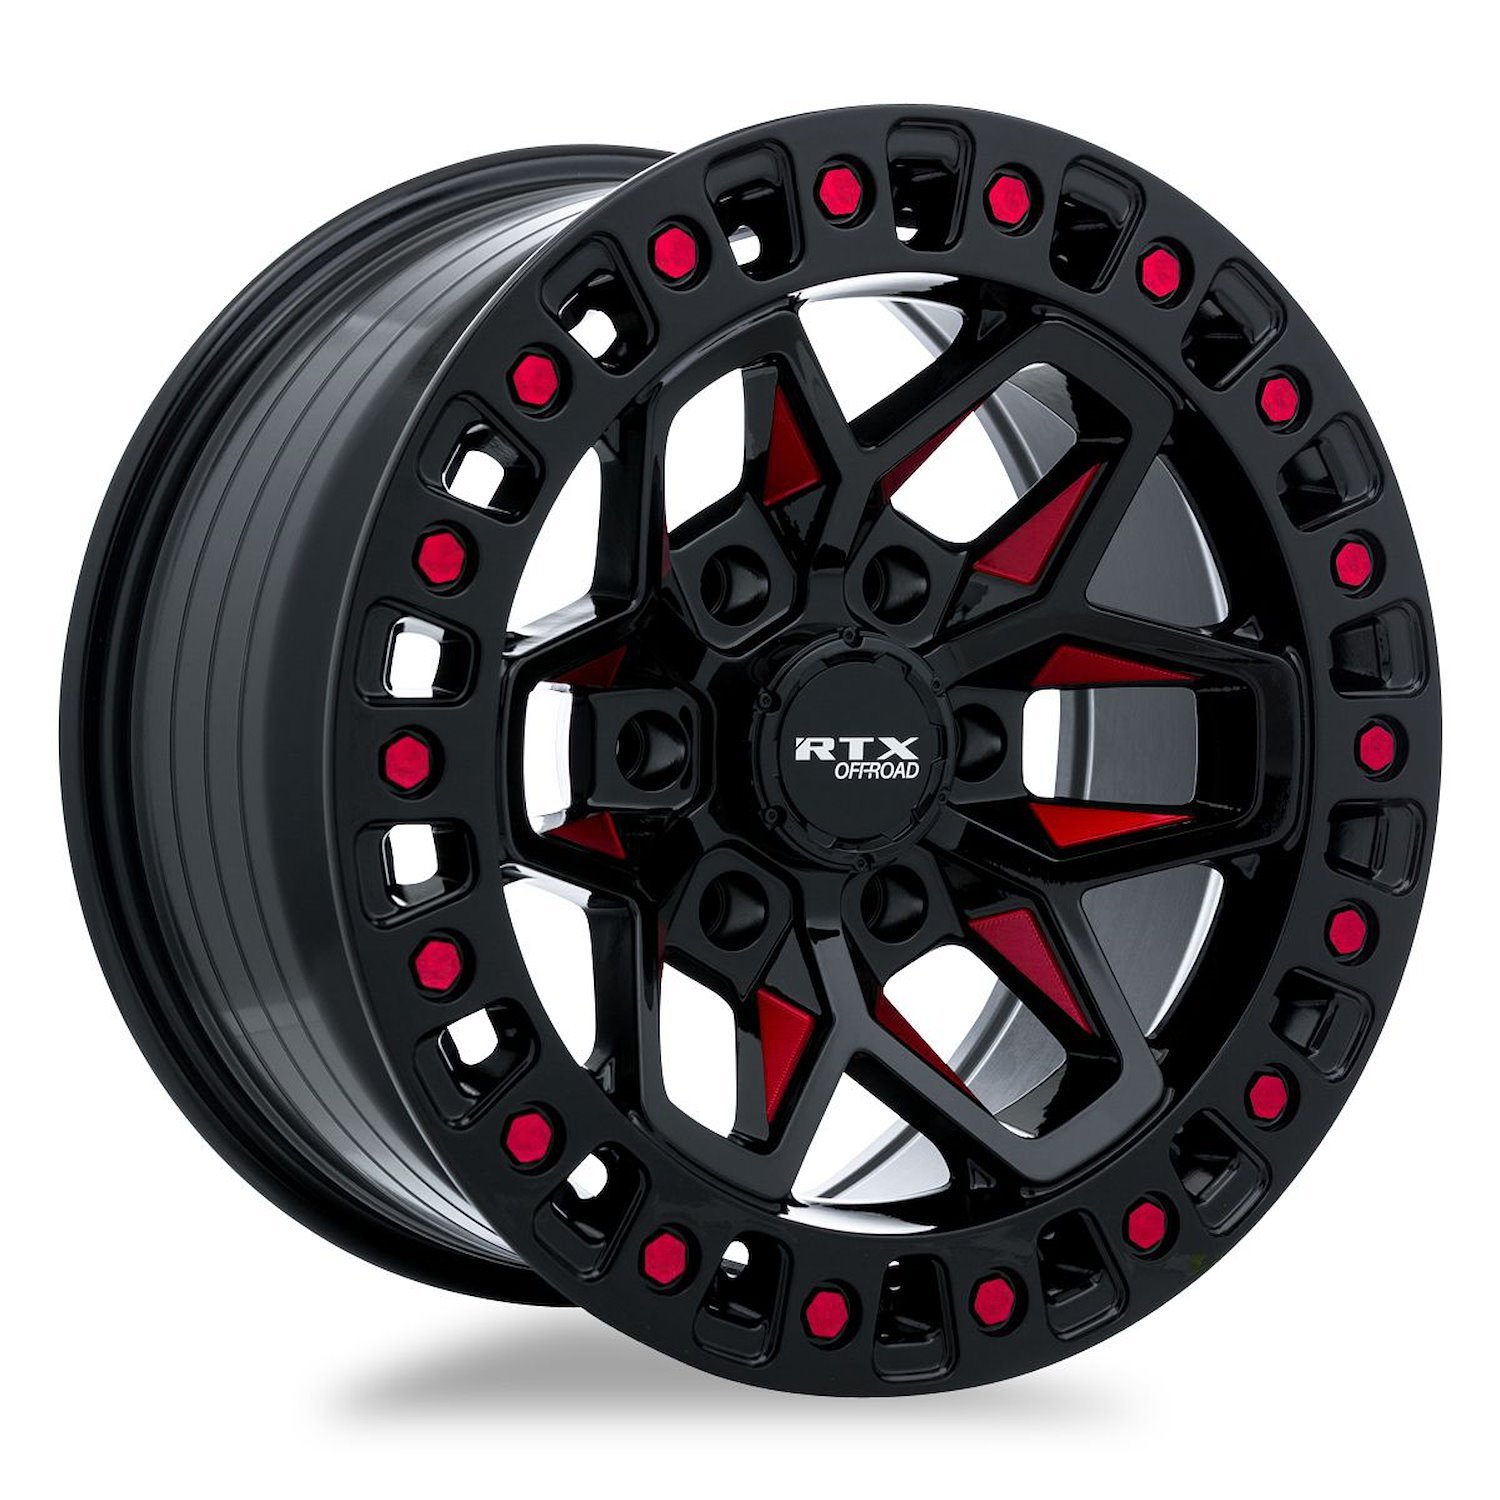 083032 Off-Road Series Zion Wheel [Size: 20" x 9"] Black Milled Red Finish